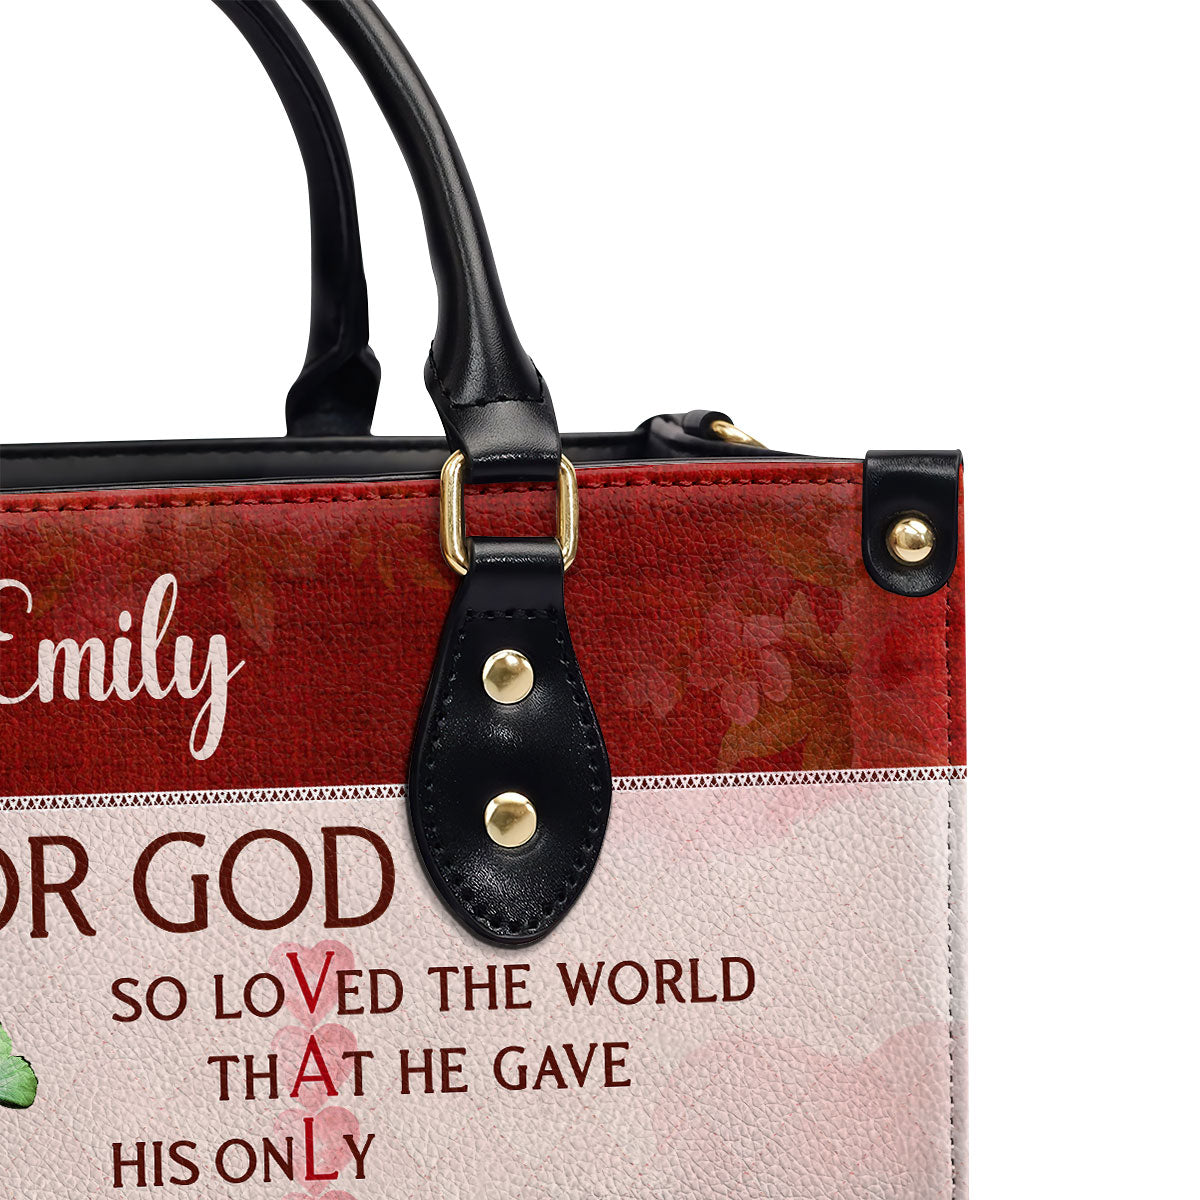 Jesuspirit | Personalized Leather Handbag With Handle | For God So Loved The World | Christian Valentine Gifts For Women Of God LHBM709